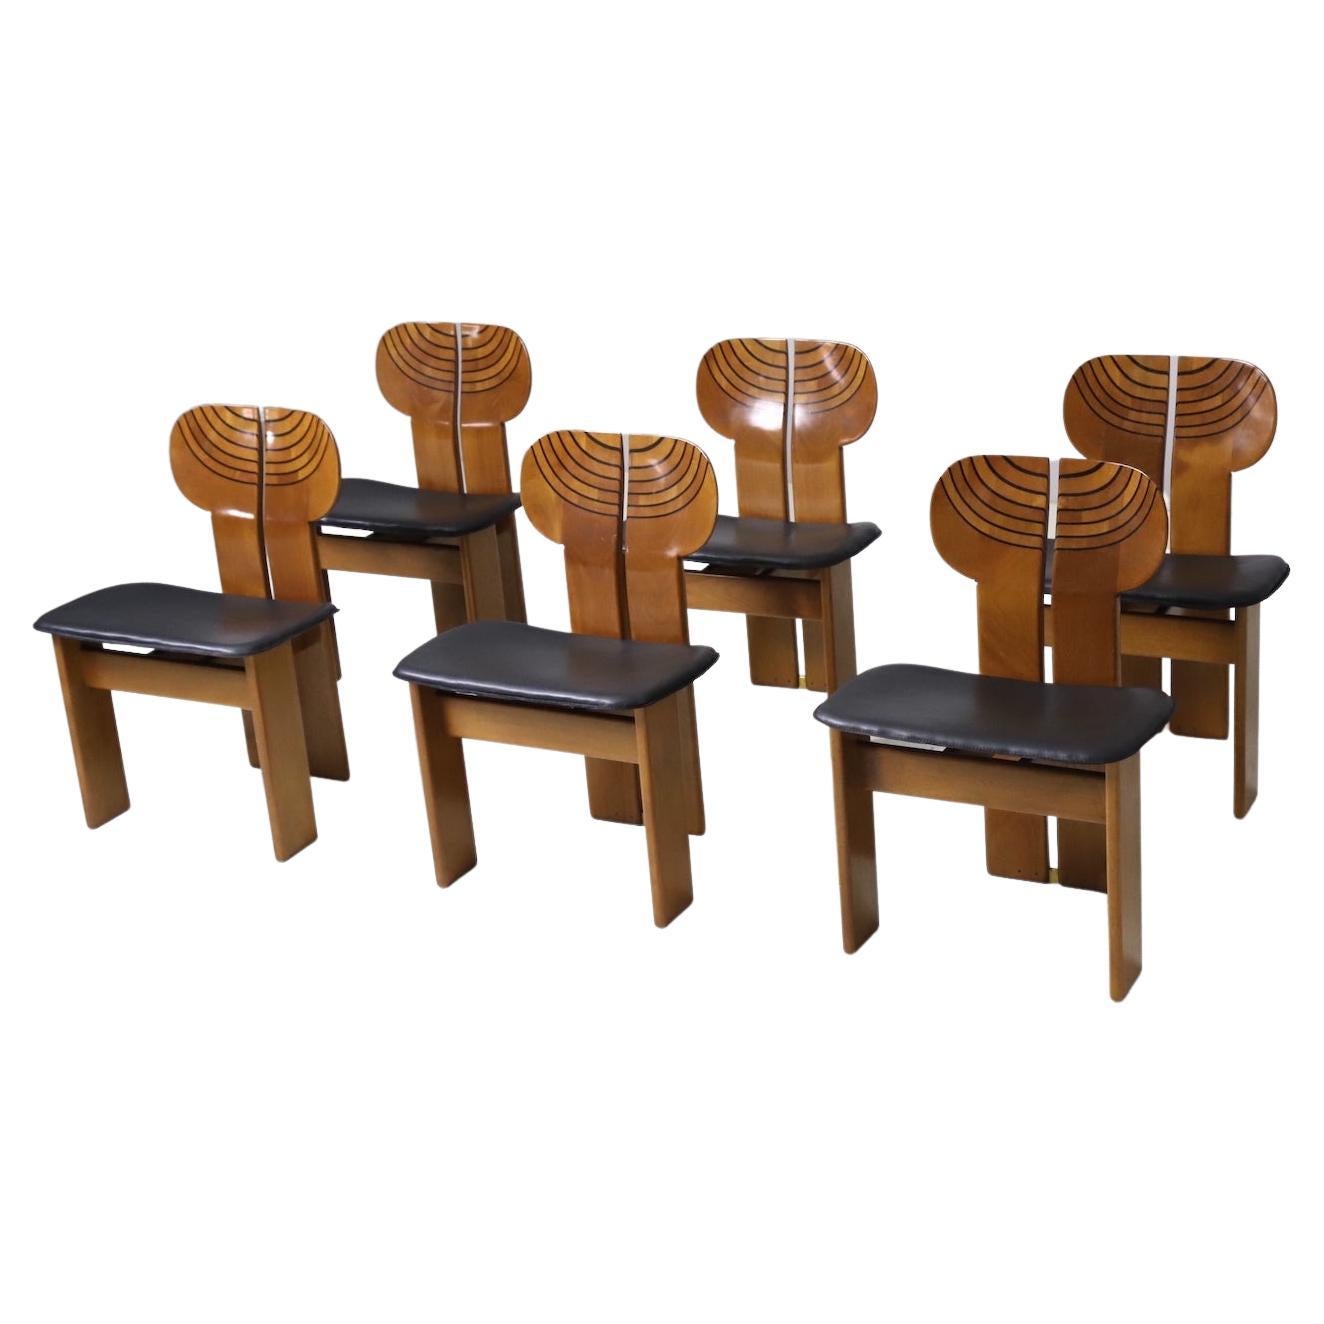 Set of 6 ‘Africa’ Chairs by Afra & Tobia Scarpa for Maxalto, 1975